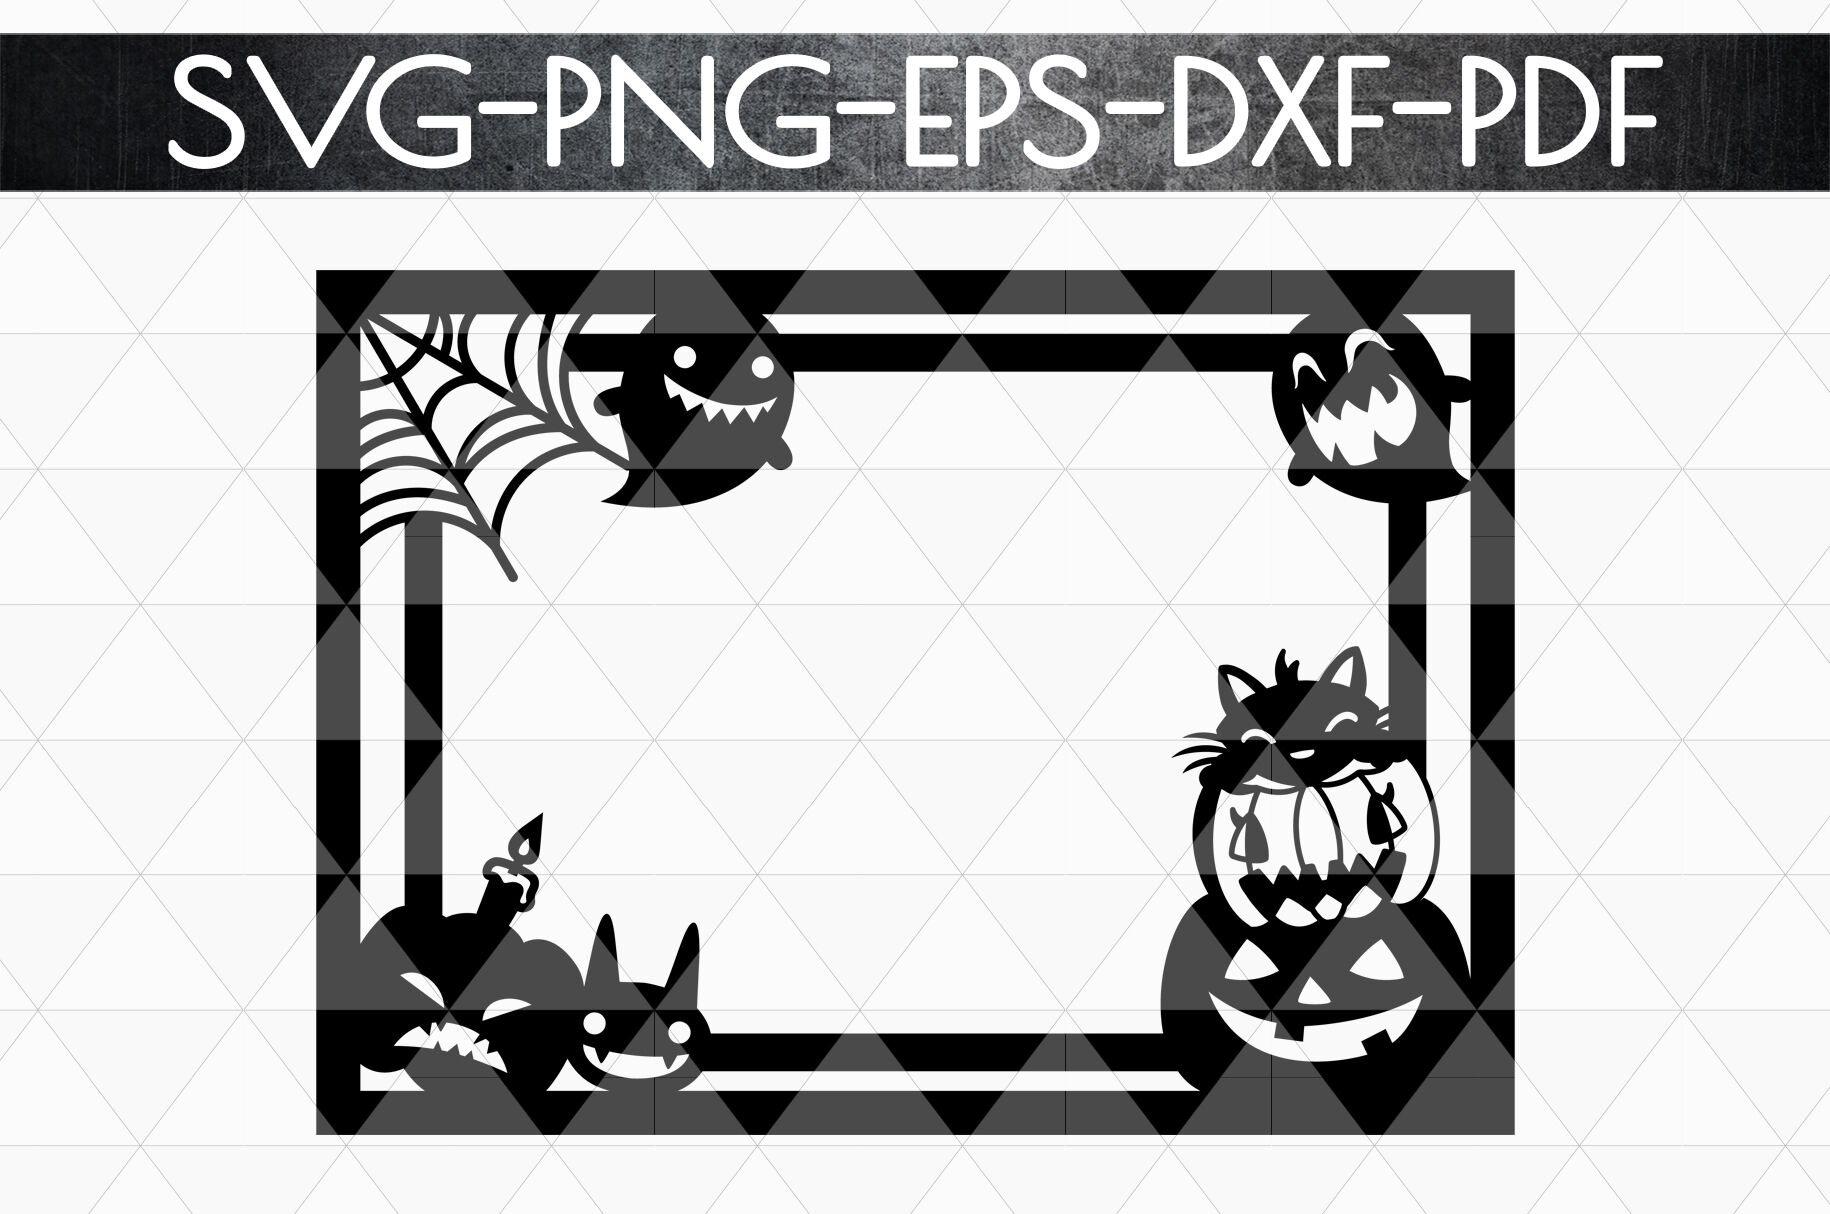 Halloween Photo Frame Papercut Template Spooky Svg Dxf Pd By Mulia Designs Thehungryjpeg Com